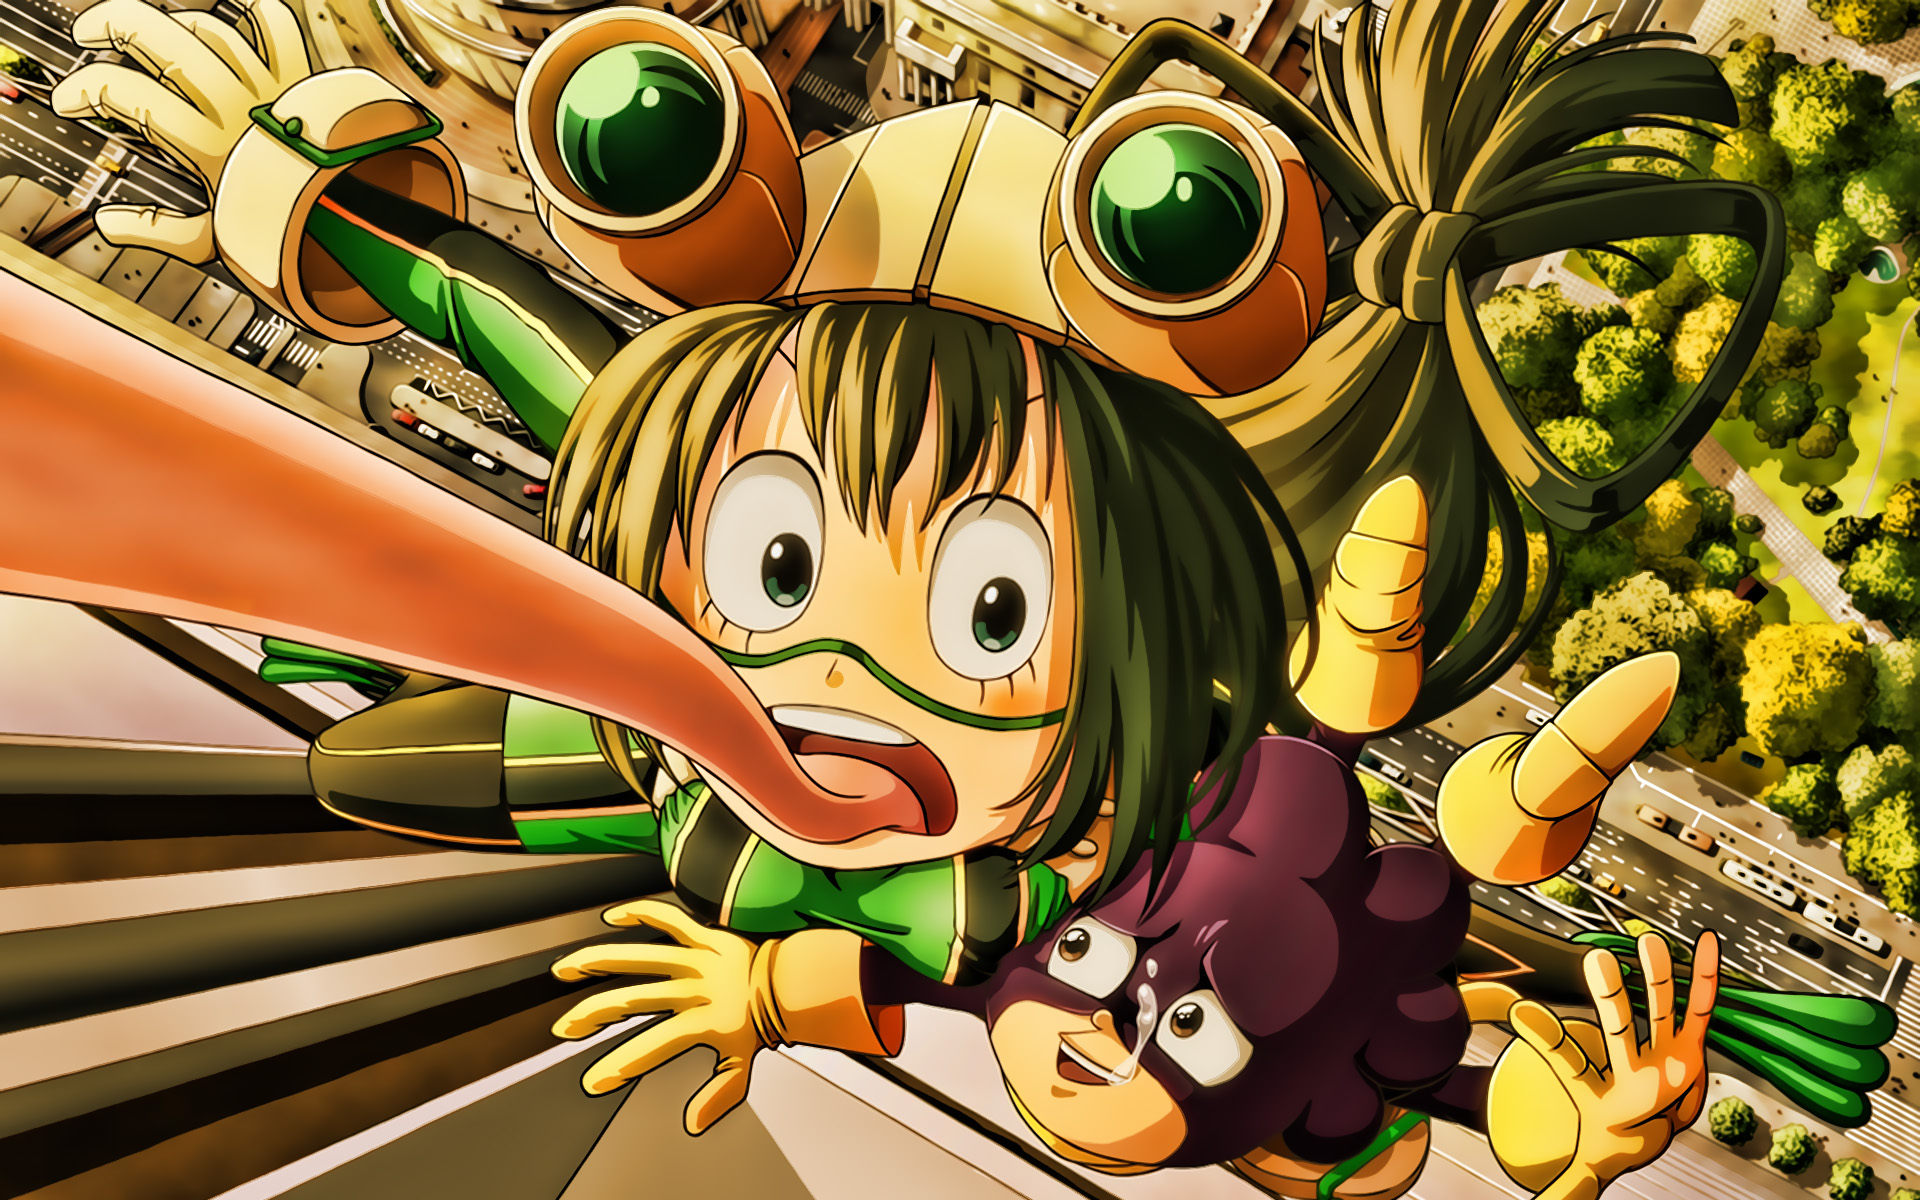 Download wallpaper Tsuyu Asui, Minoru Mineta, My Hero Academia characters, Froppy, Grape Juice, artwork, manga, Boku no Hero Academia, My Hero Academia for desktop with resolution 1920x1200. High Quality HD picture wallpaper